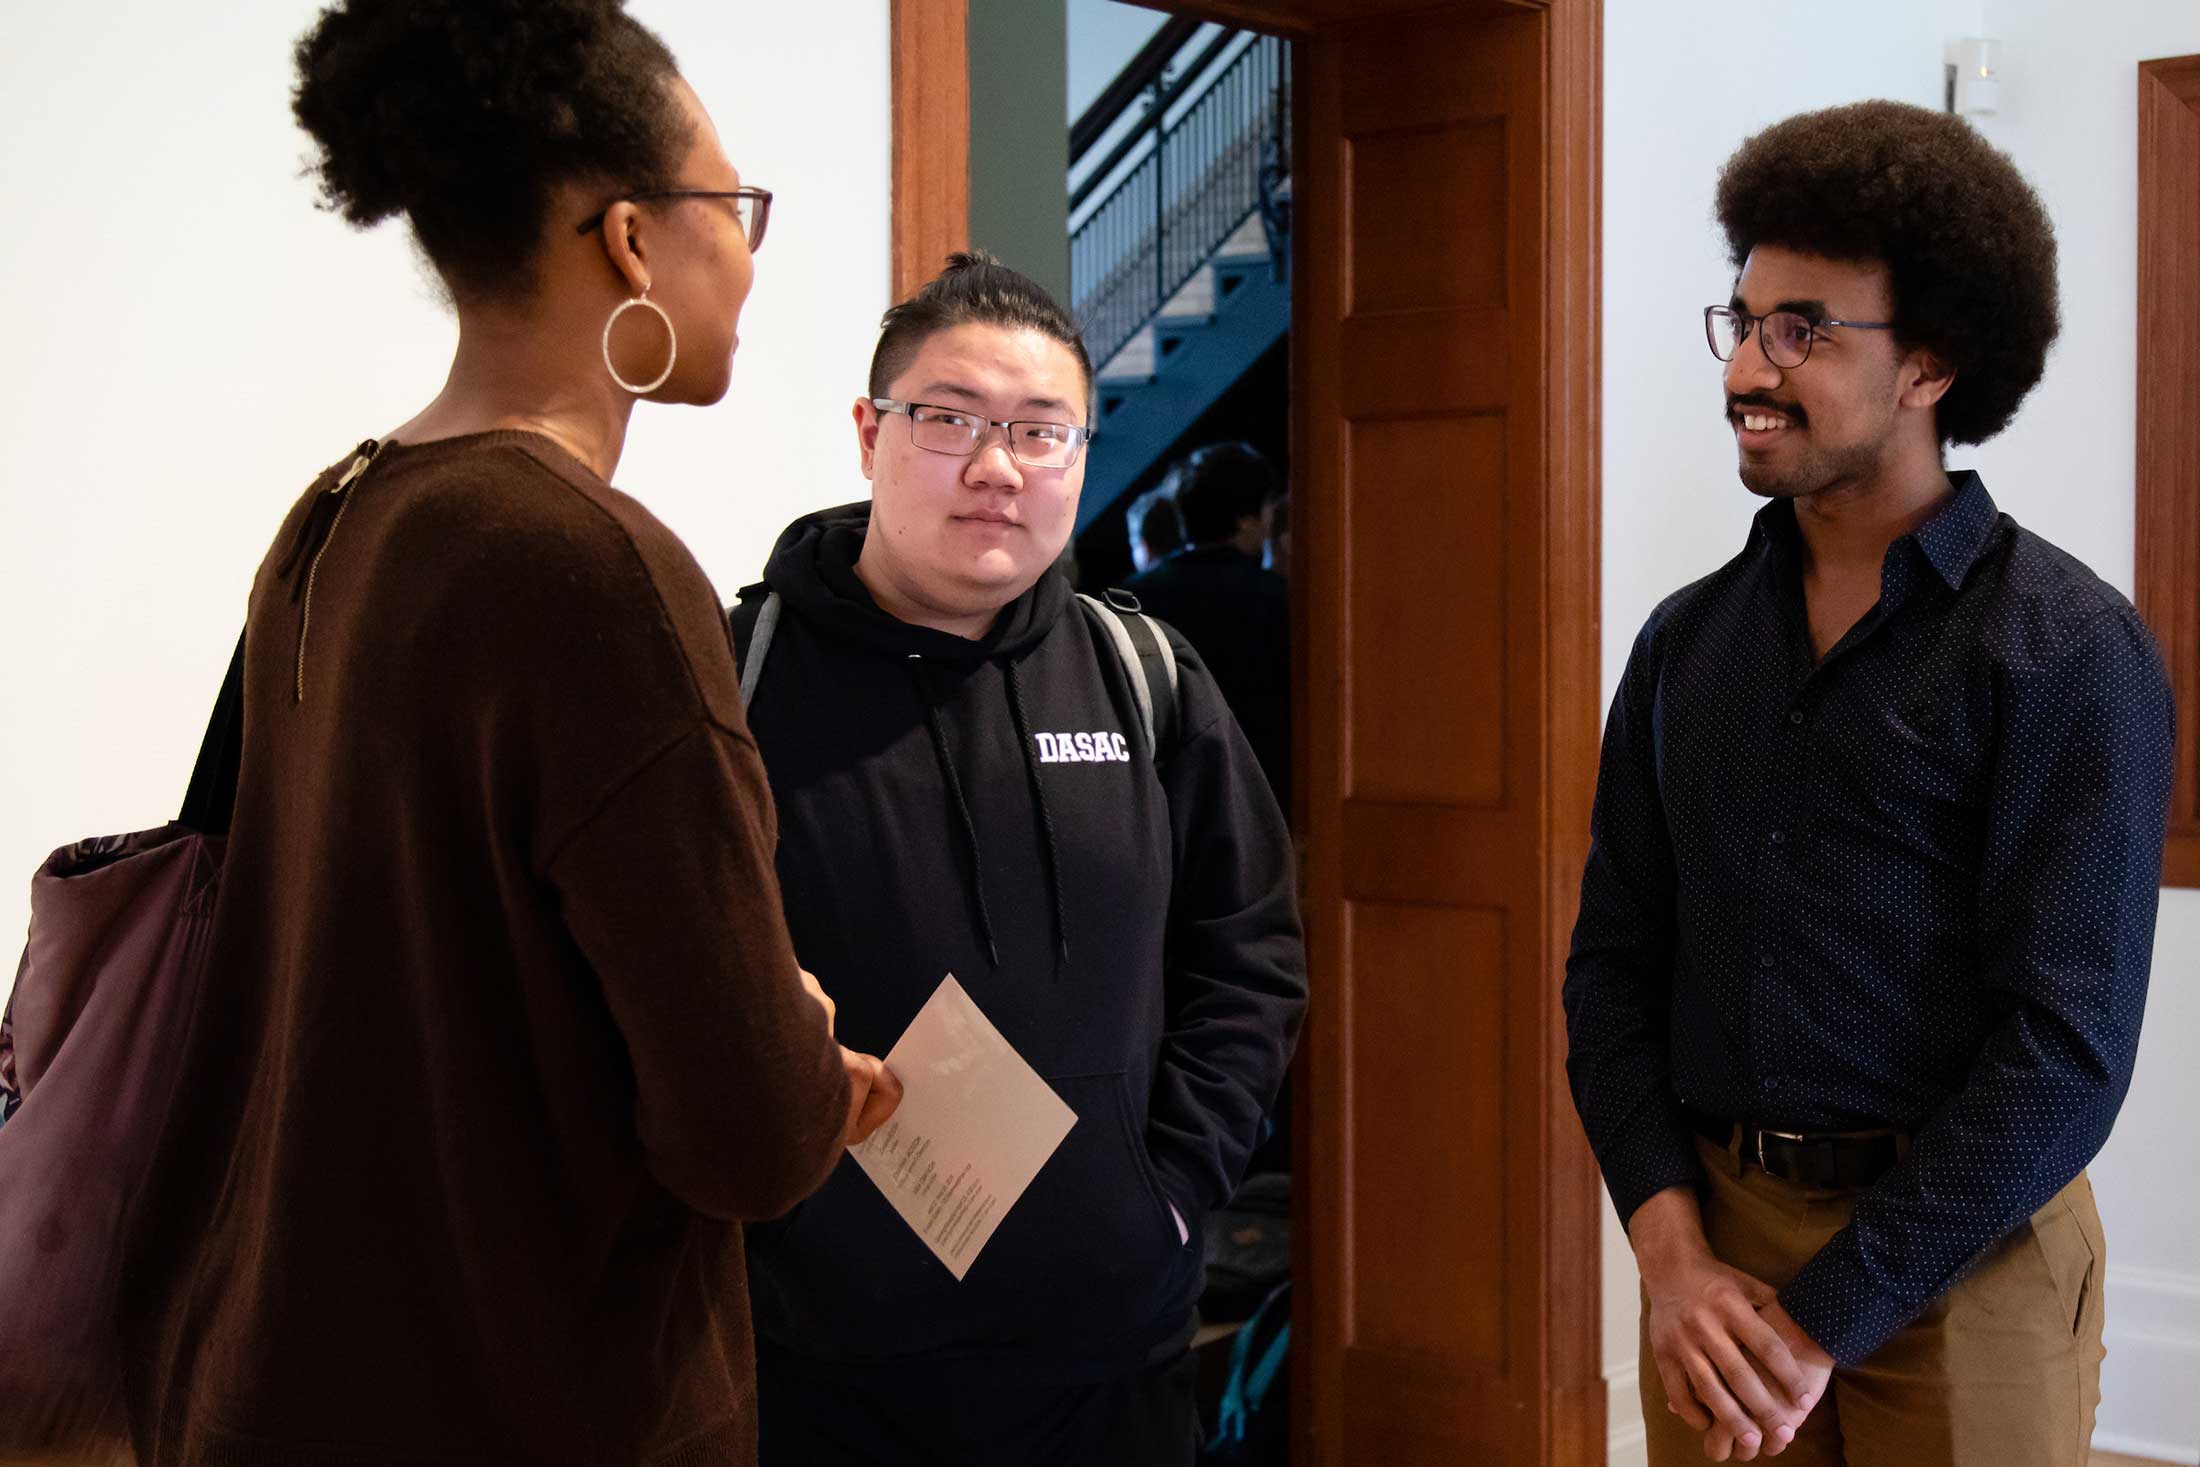 Jonathan Jackson ’19 (right) at the reception for 3 graduating artists